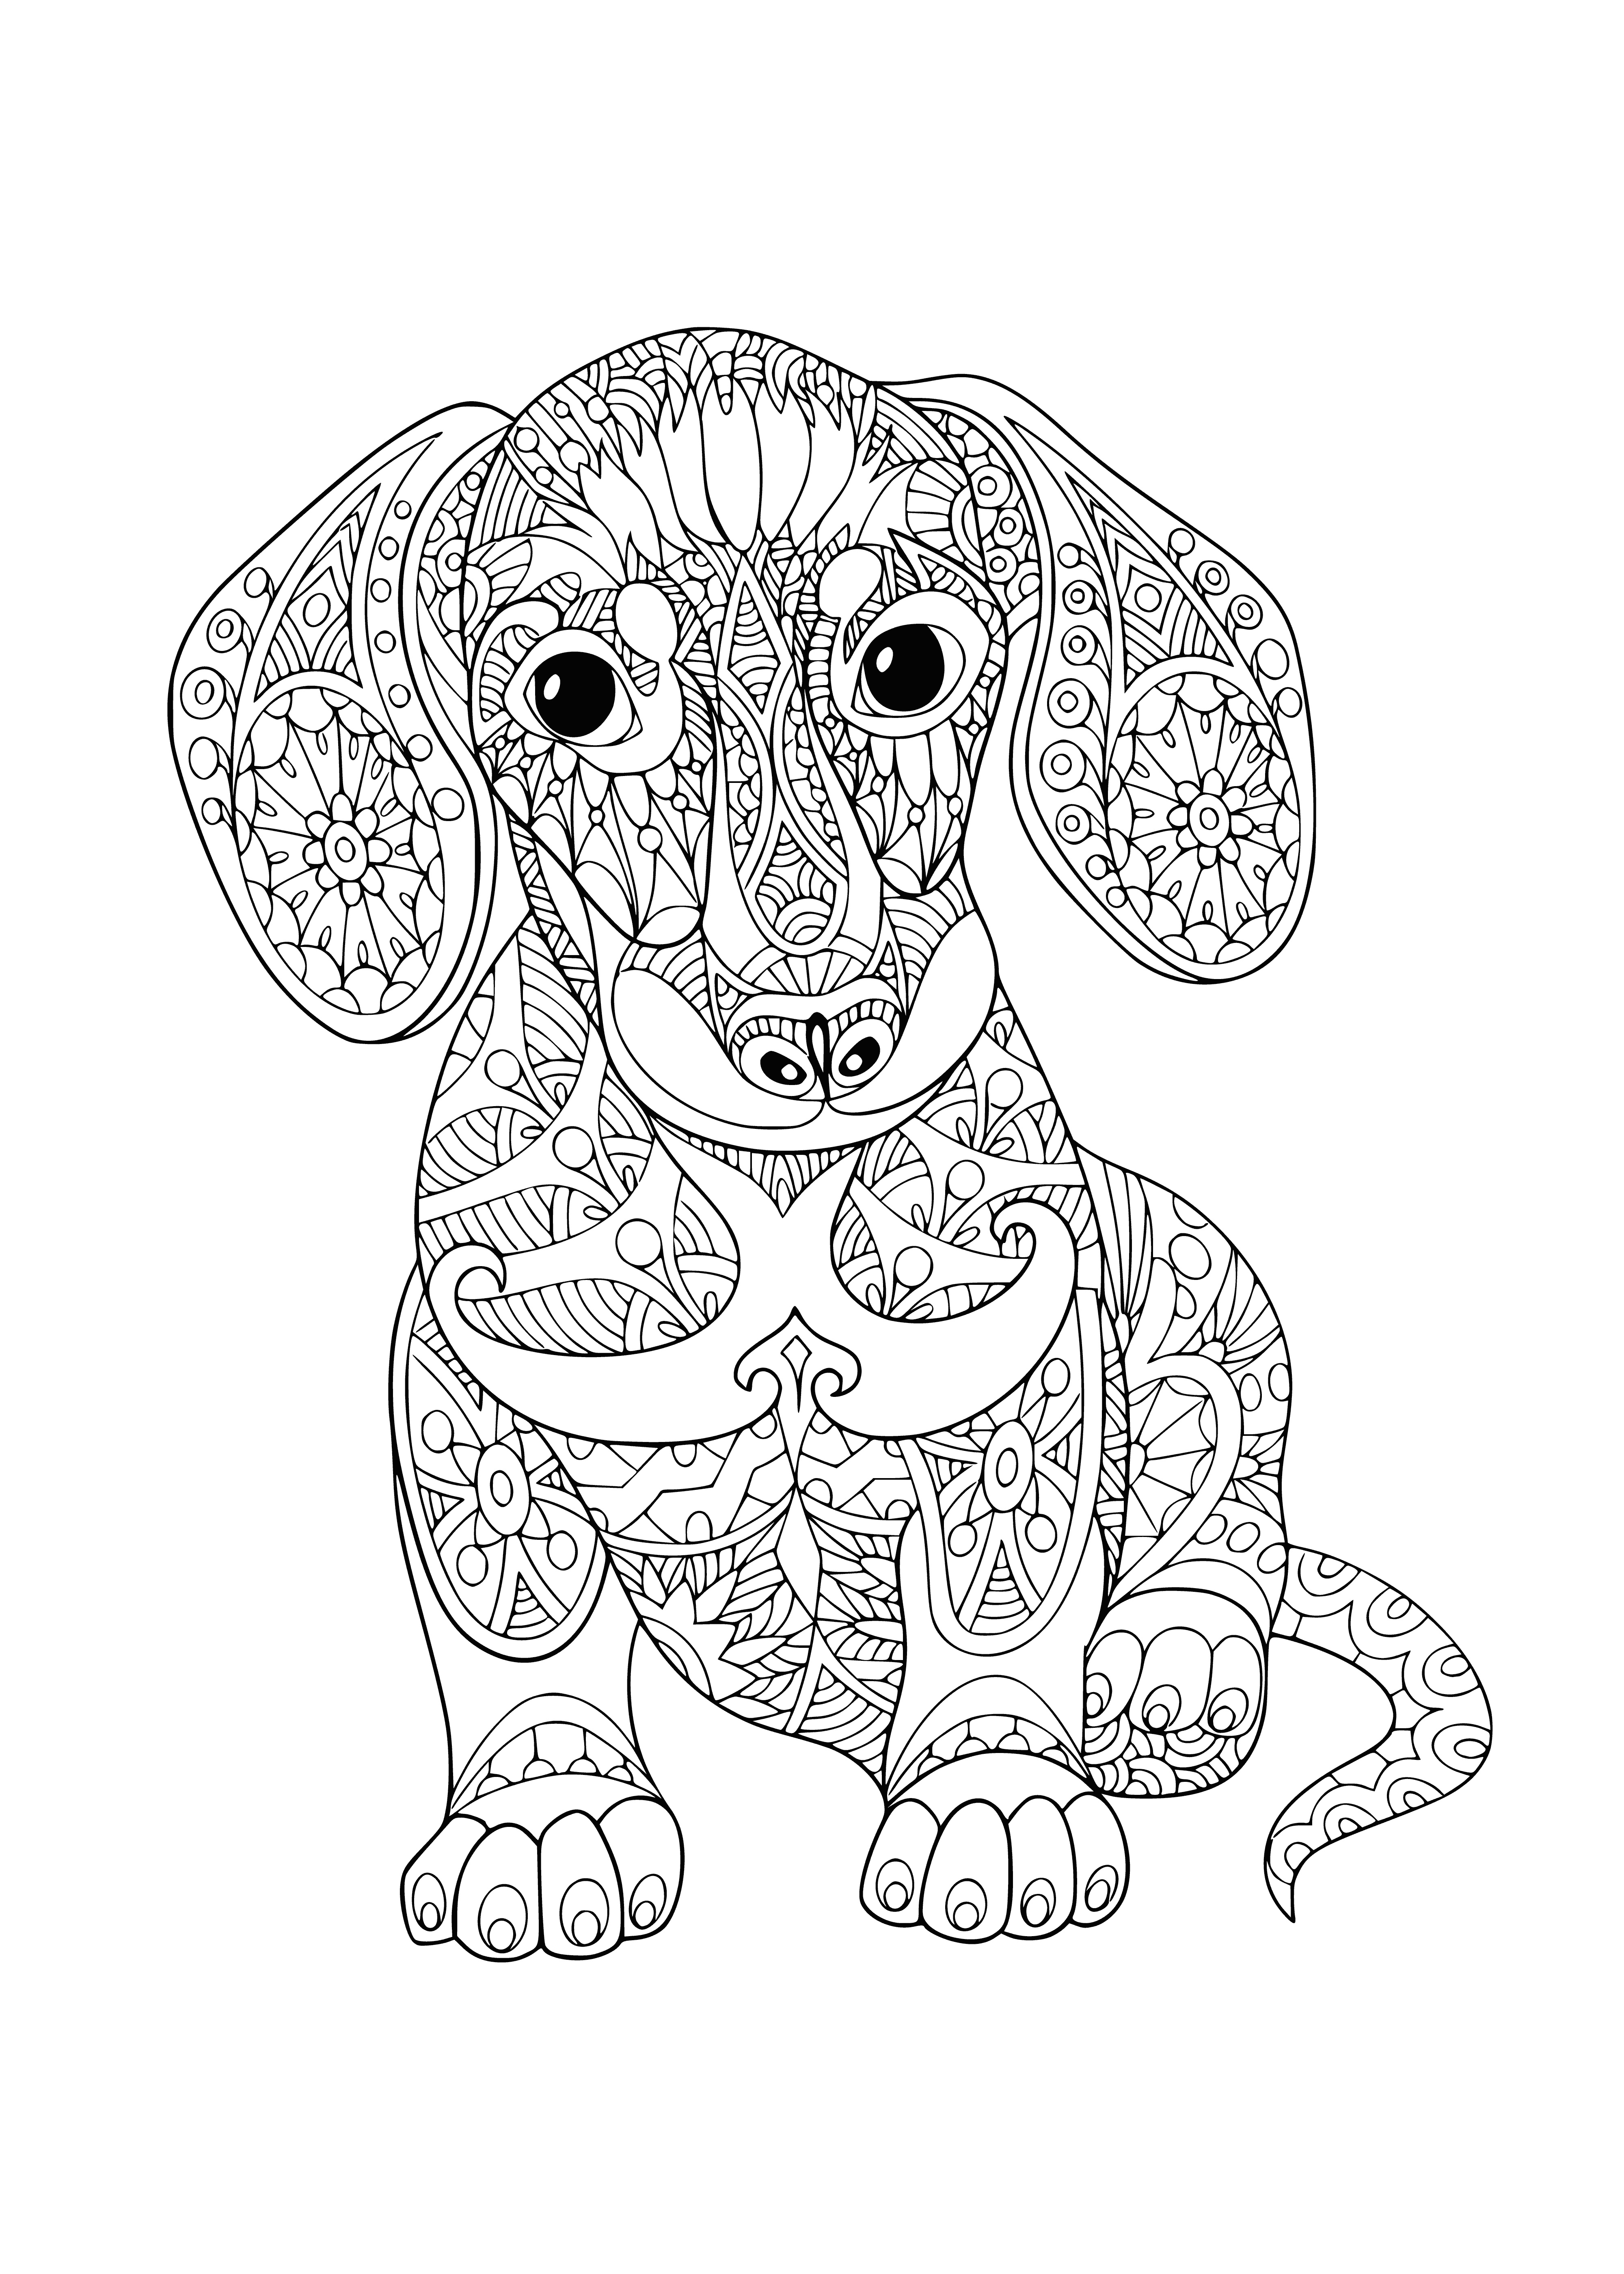 coloring page: A dog with a blue ribbon and bow stands in front of a teal background, smiling with its tongue out.